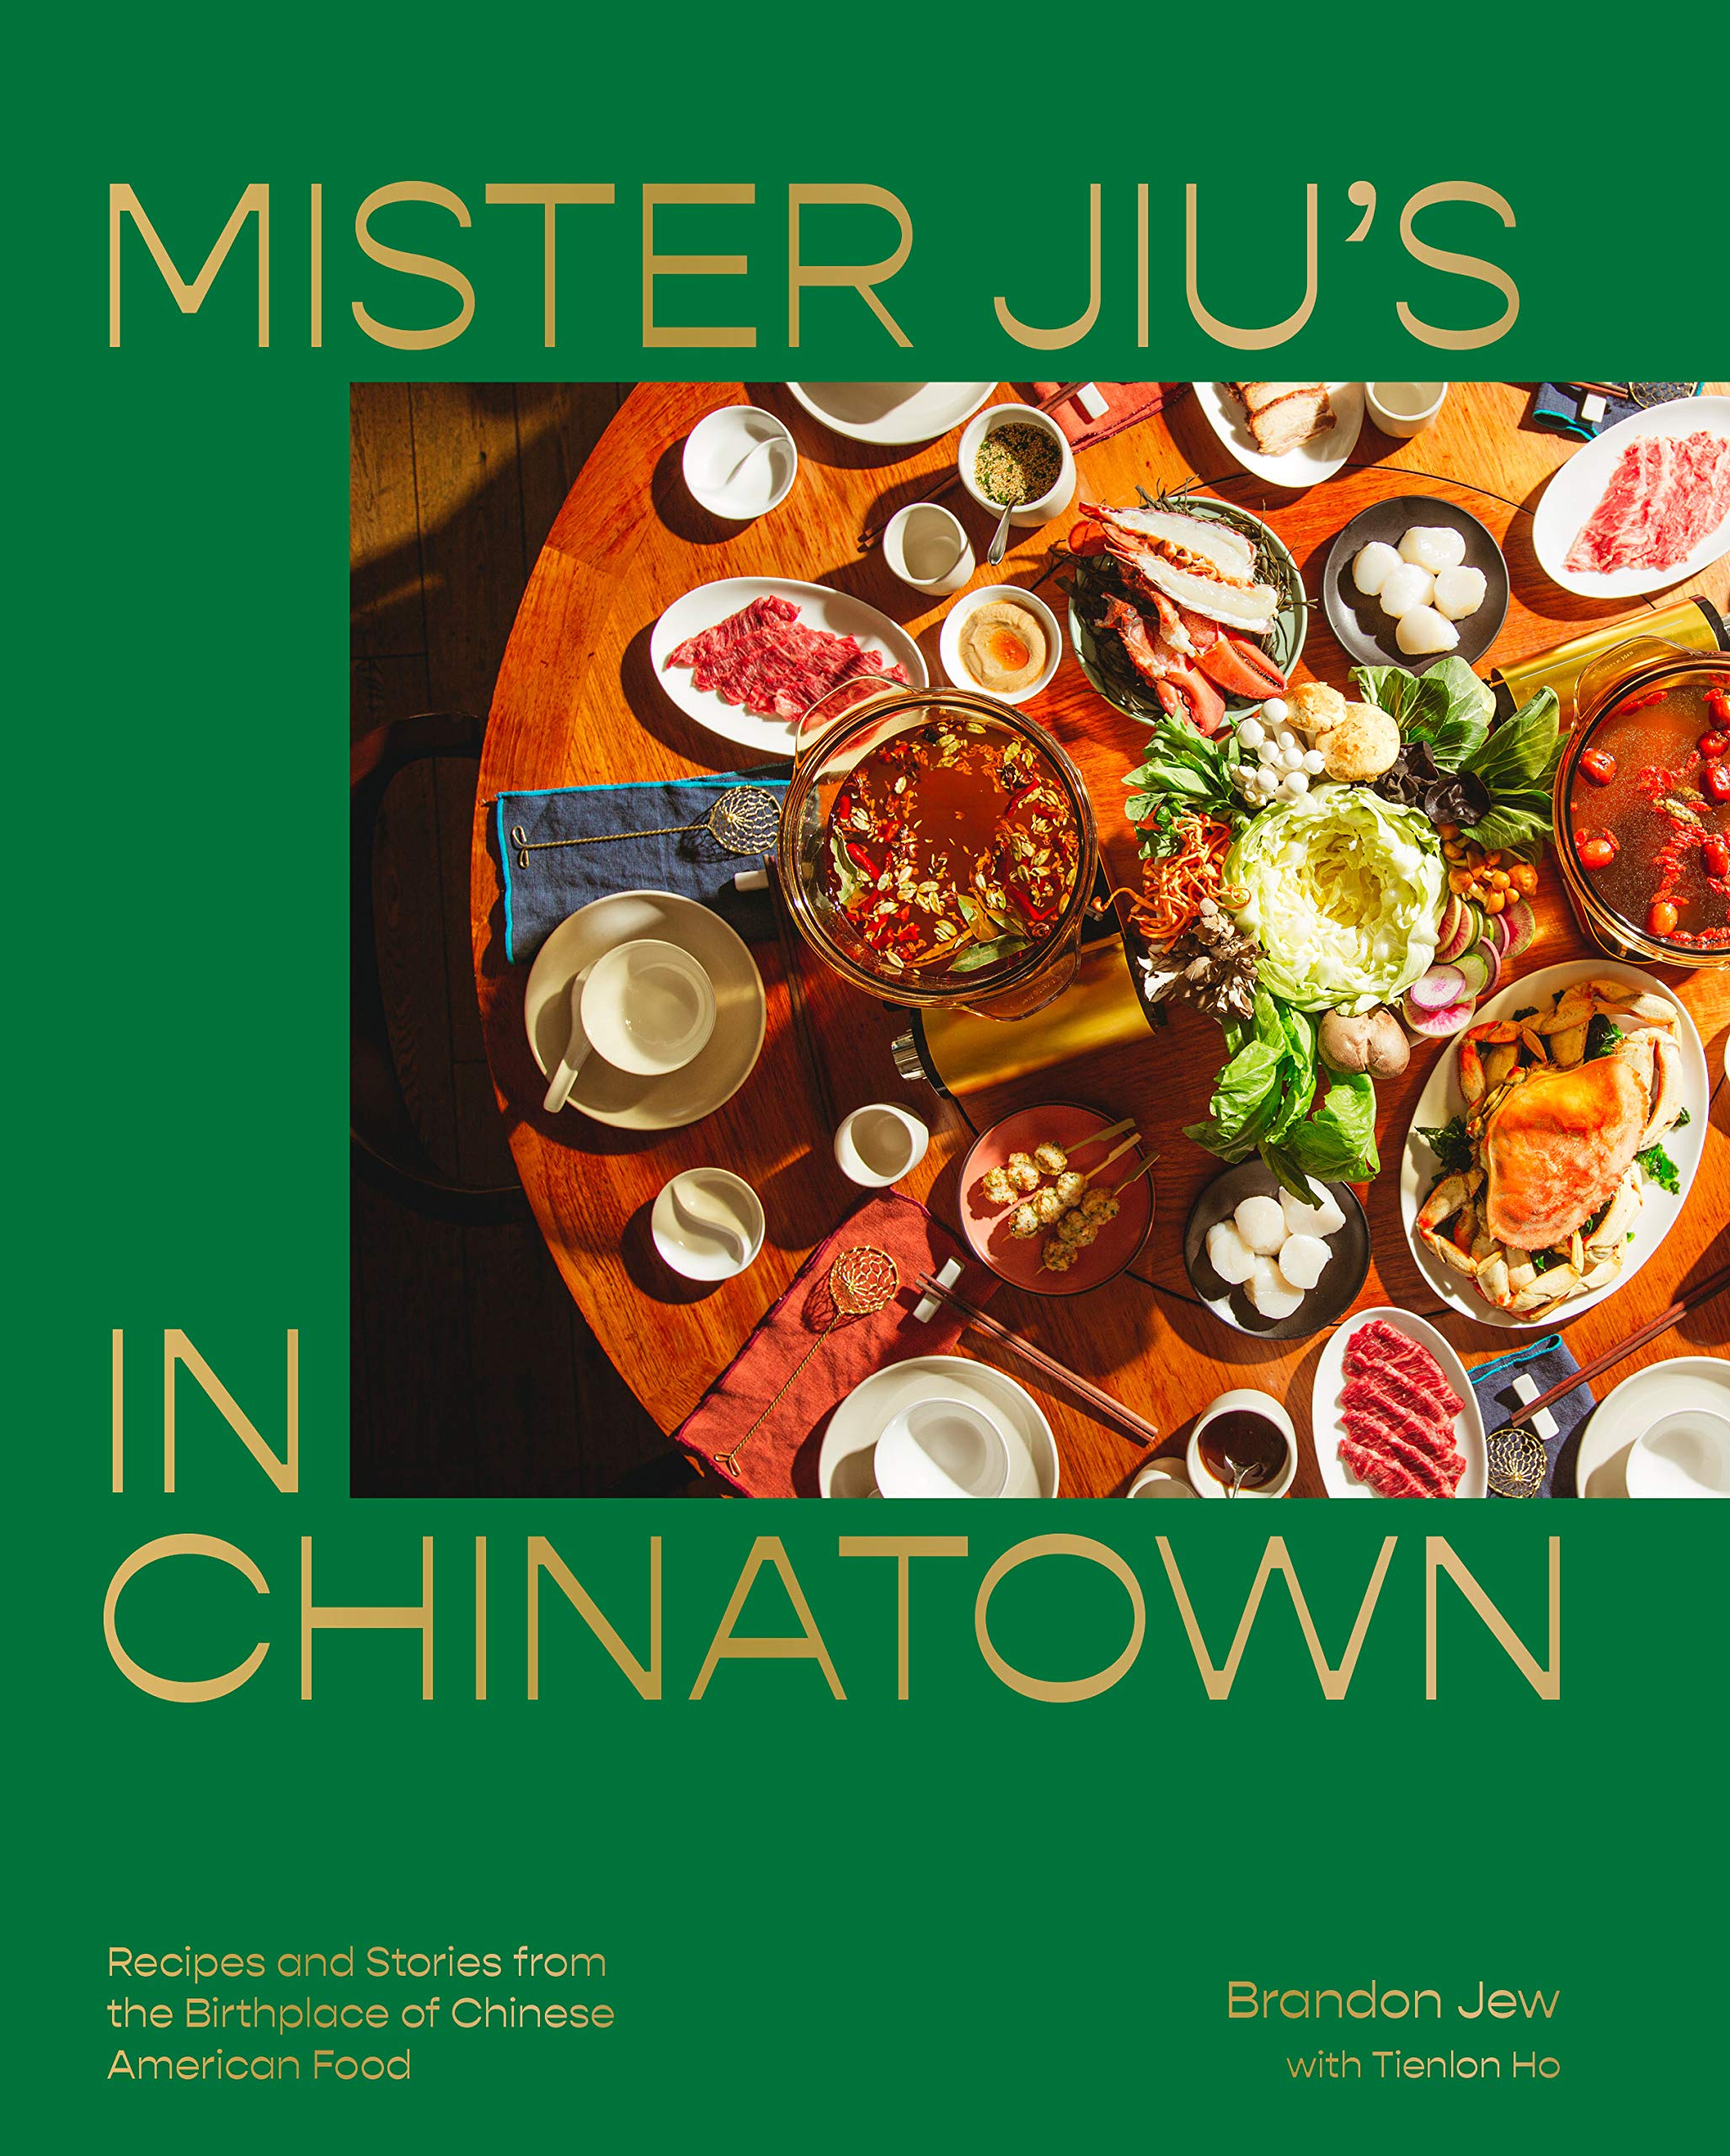 Mister Jiu's in Chinatown: Recipes and Stories from the Birthplace of Chinese American Food (Brandon Jew and Tienlon Ho) *Signed*